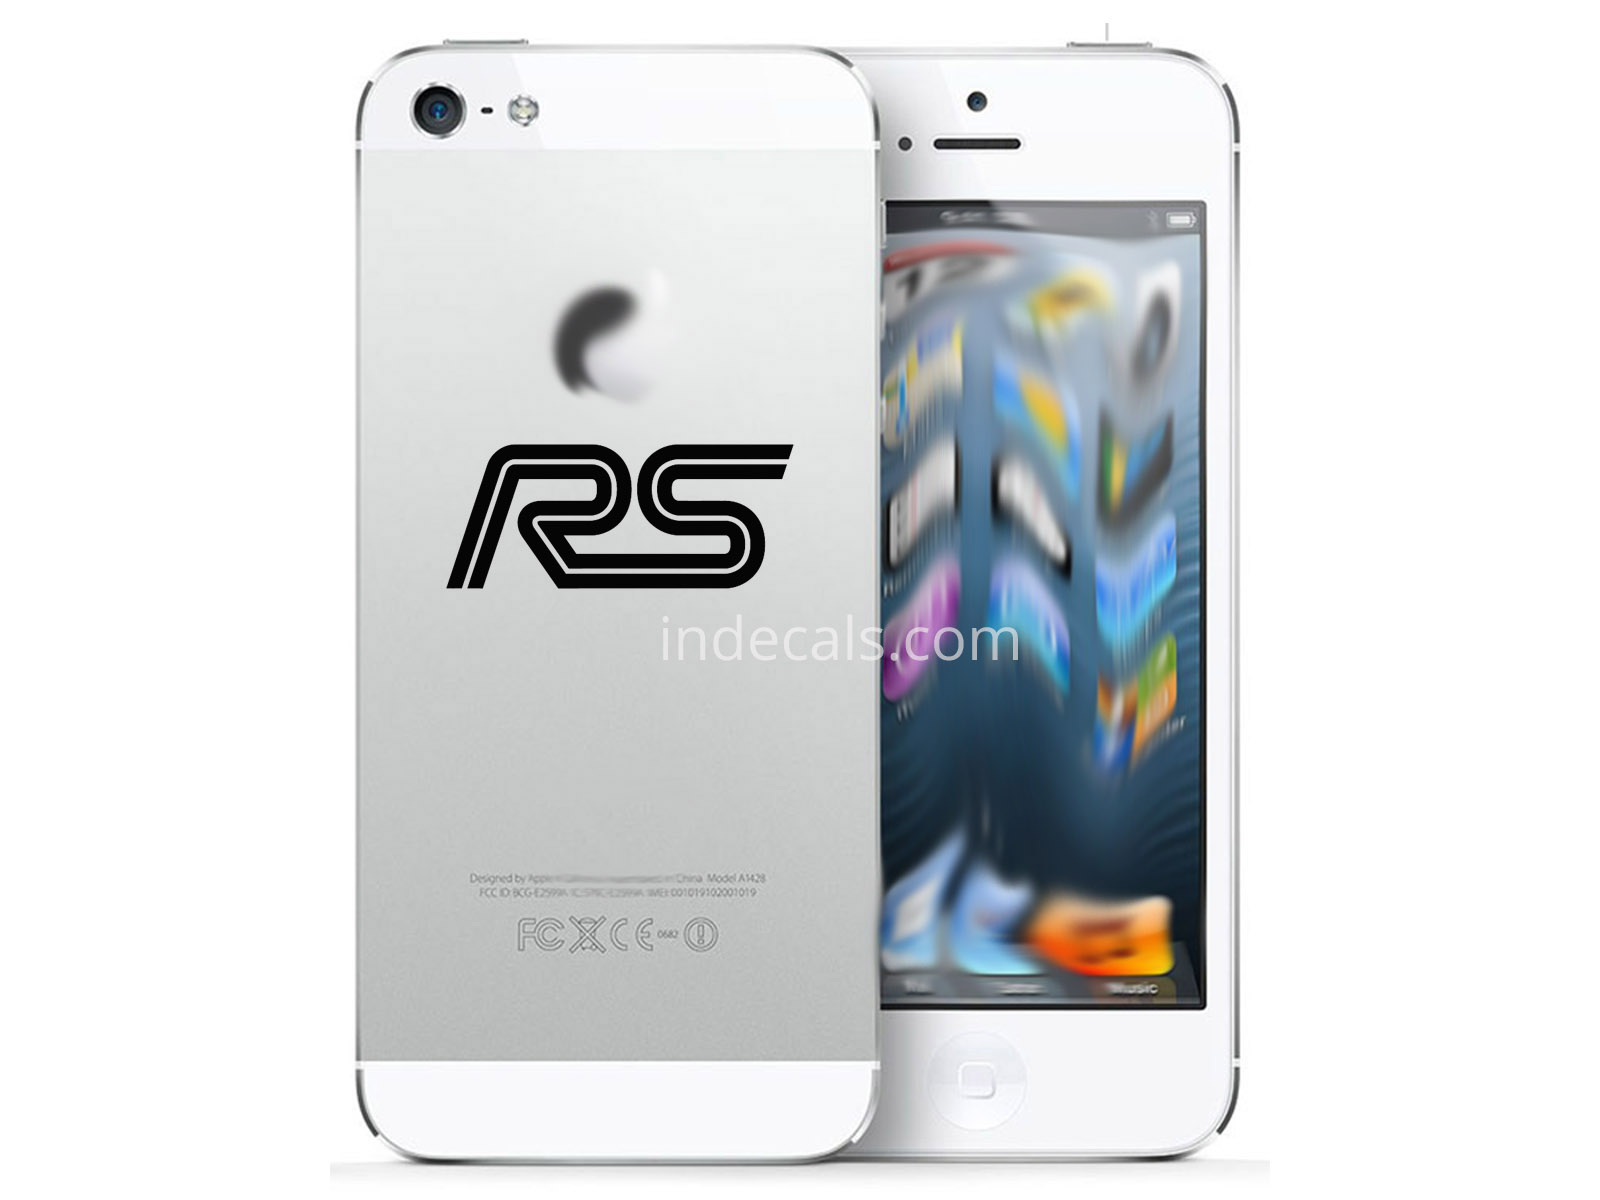 3 x Ford RS Stickers for Smartphone - Black